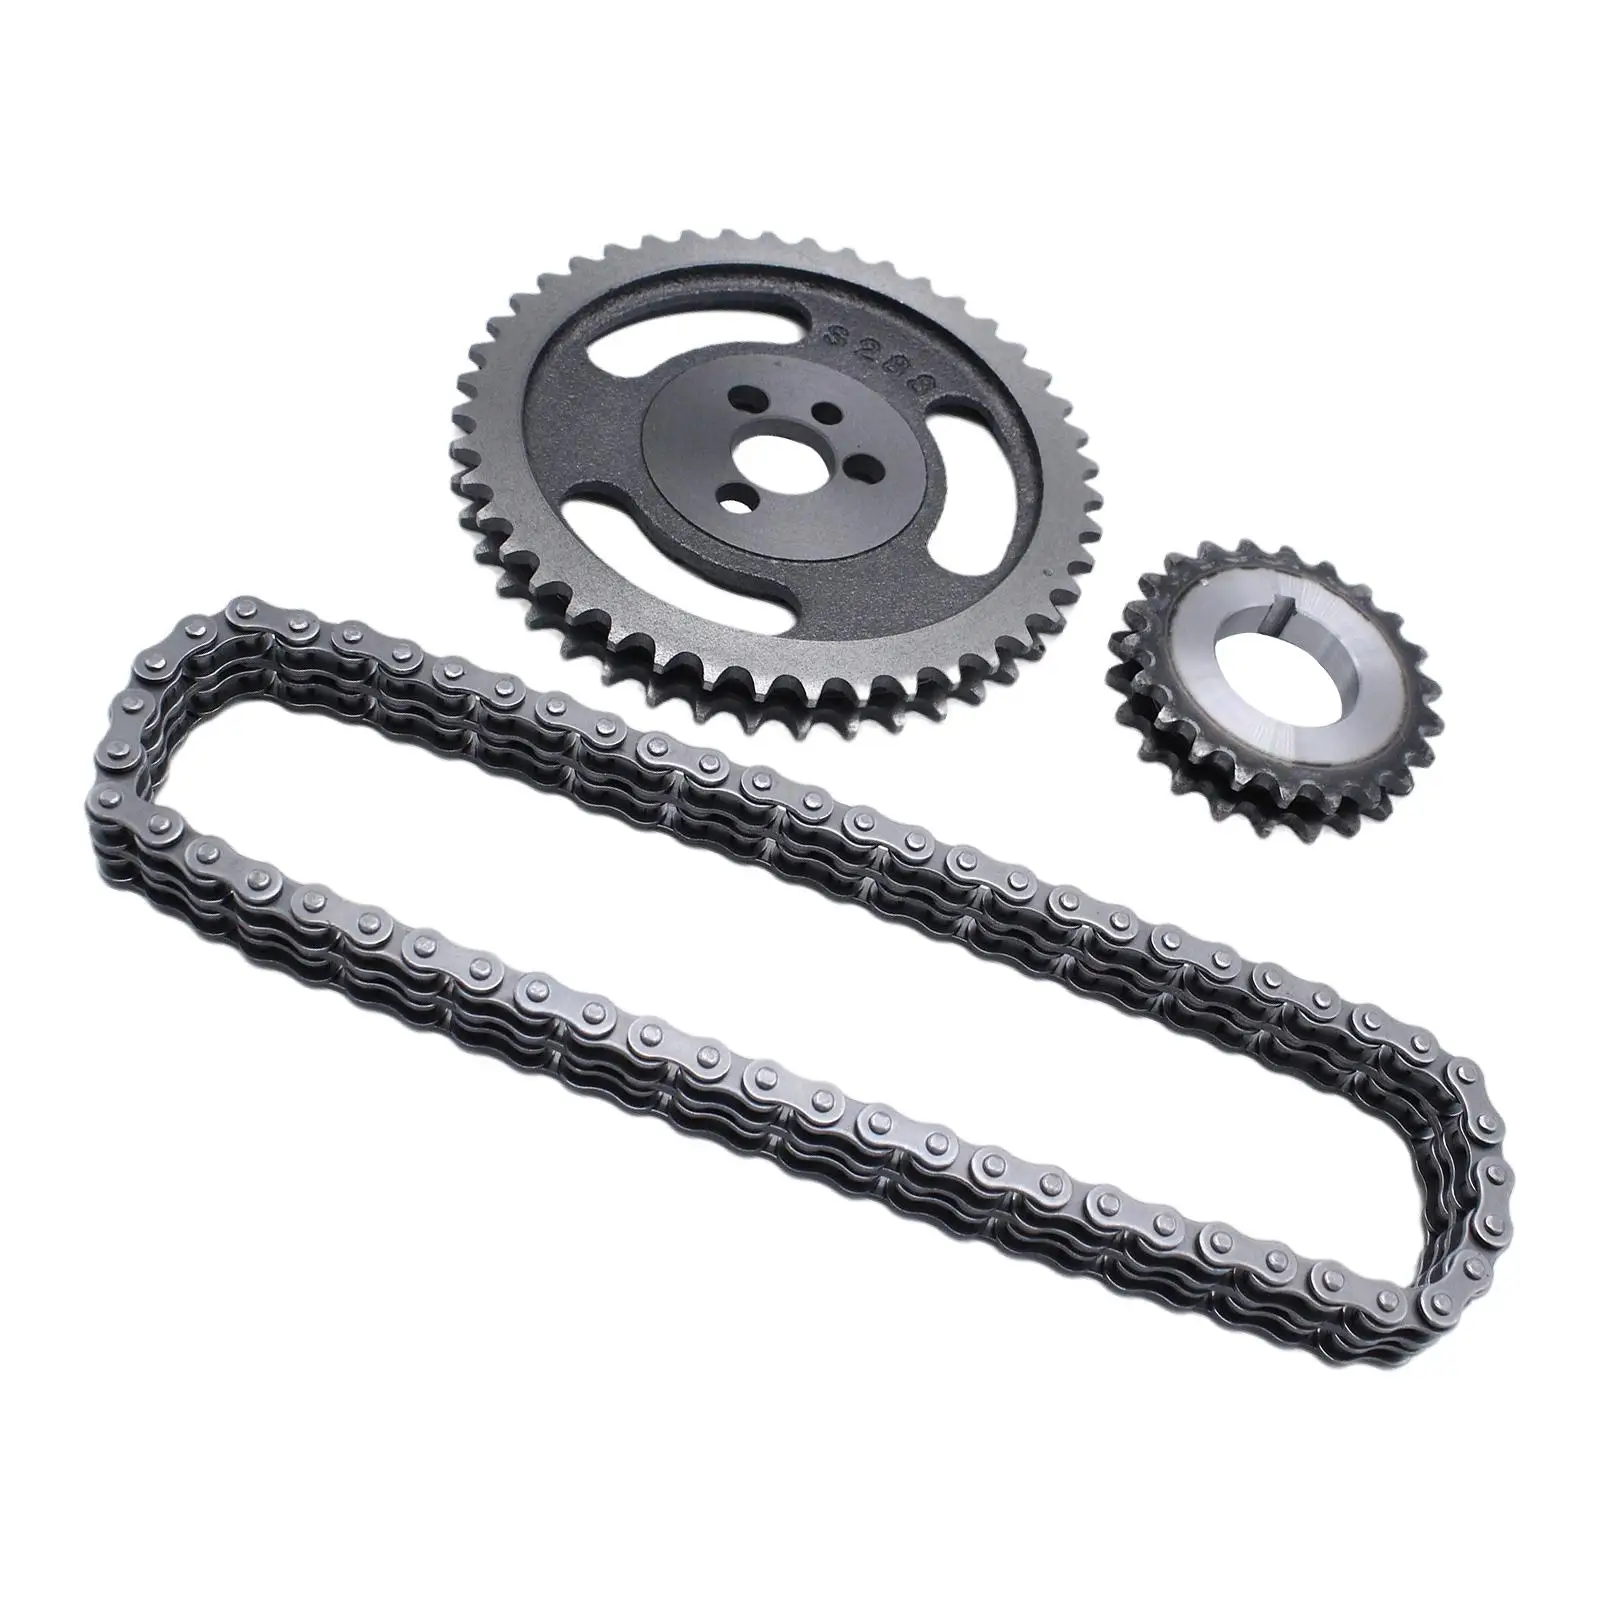 Double Roller Timing Chain -3023K 7439-1203 Double Row Fits for Sbc 5.7L 350 383 400 327